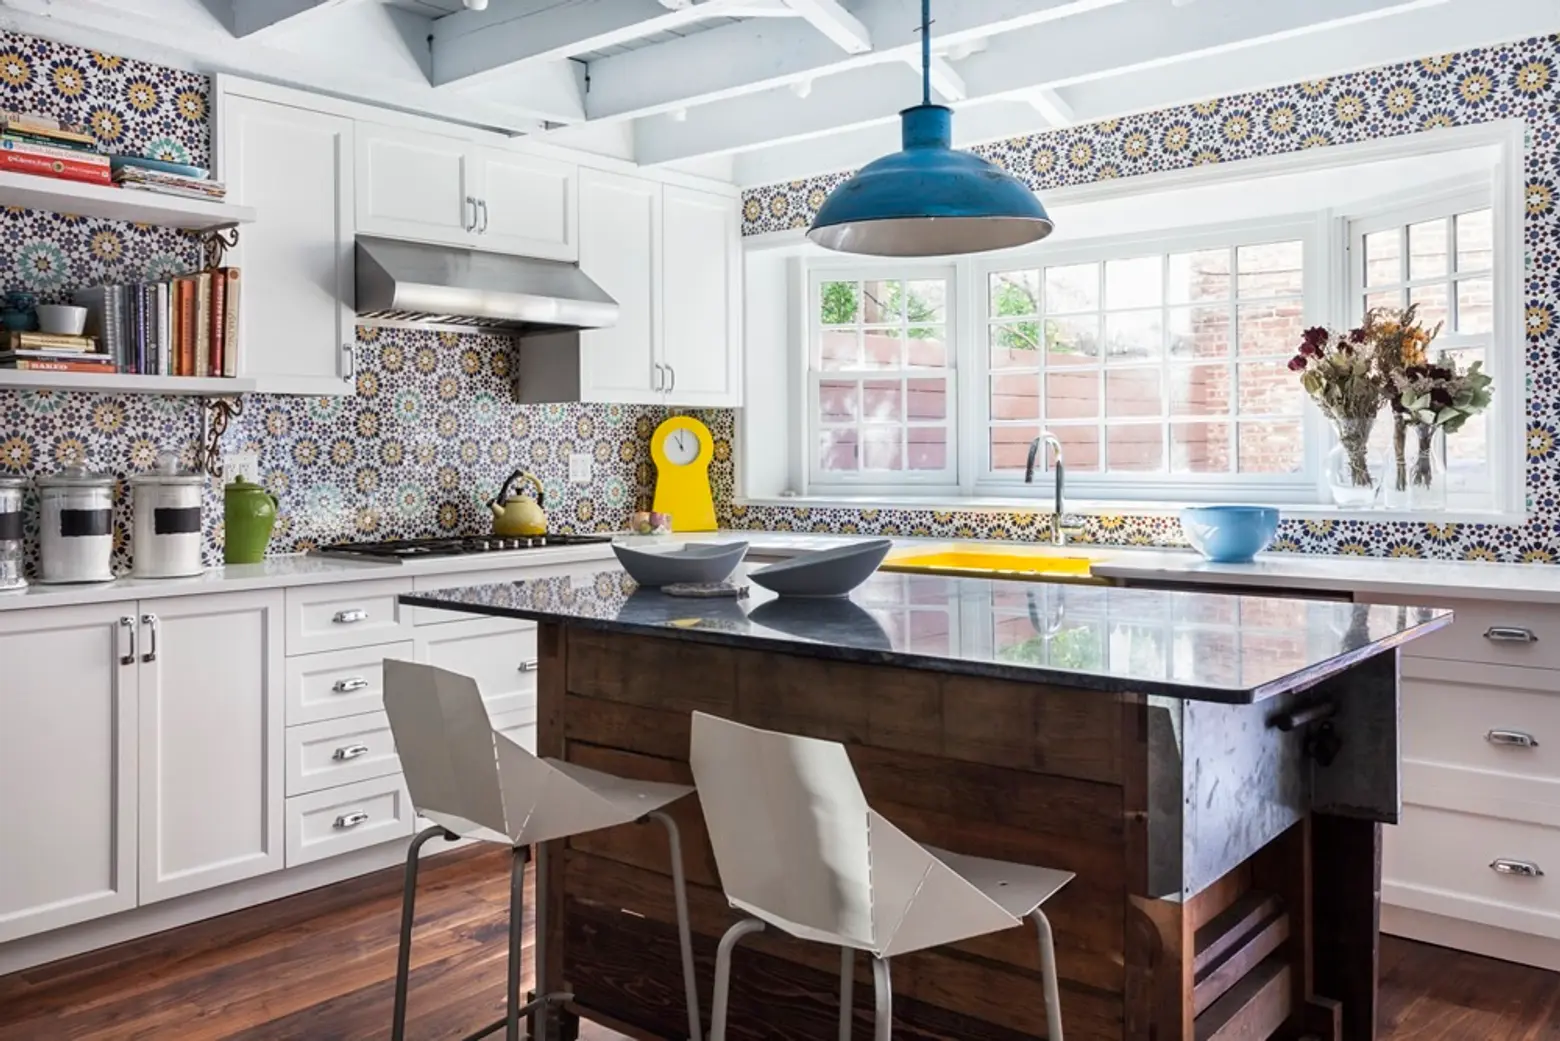 Jennifer Morris Infuses Bold Design Accents Into This Vibrant Fort Greene Brownstone Interior